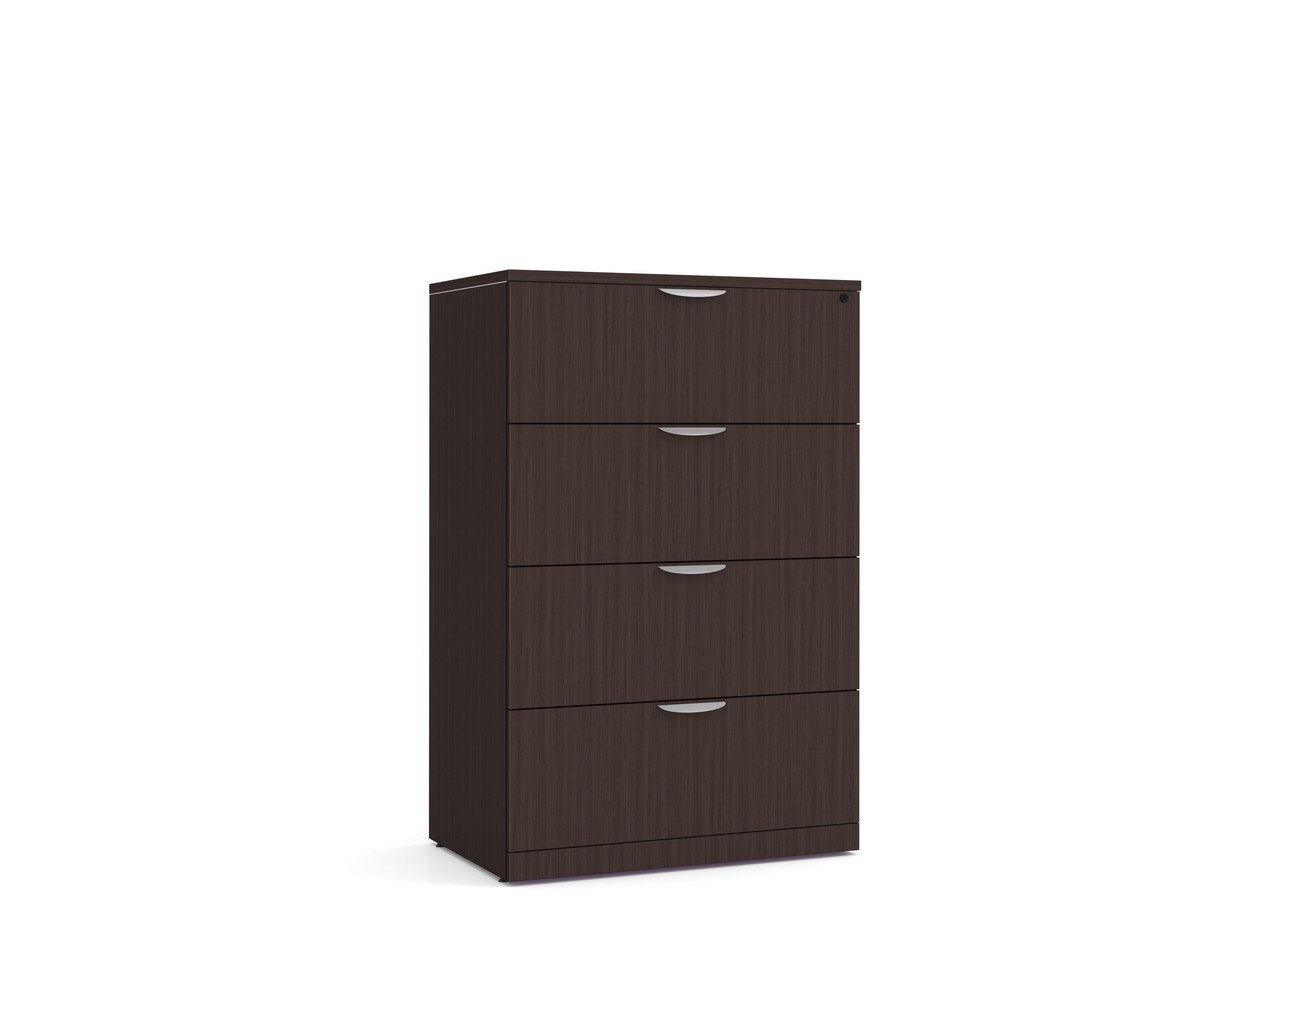 4 Drawer Lateral Filing Cabinet with Espresso Finish